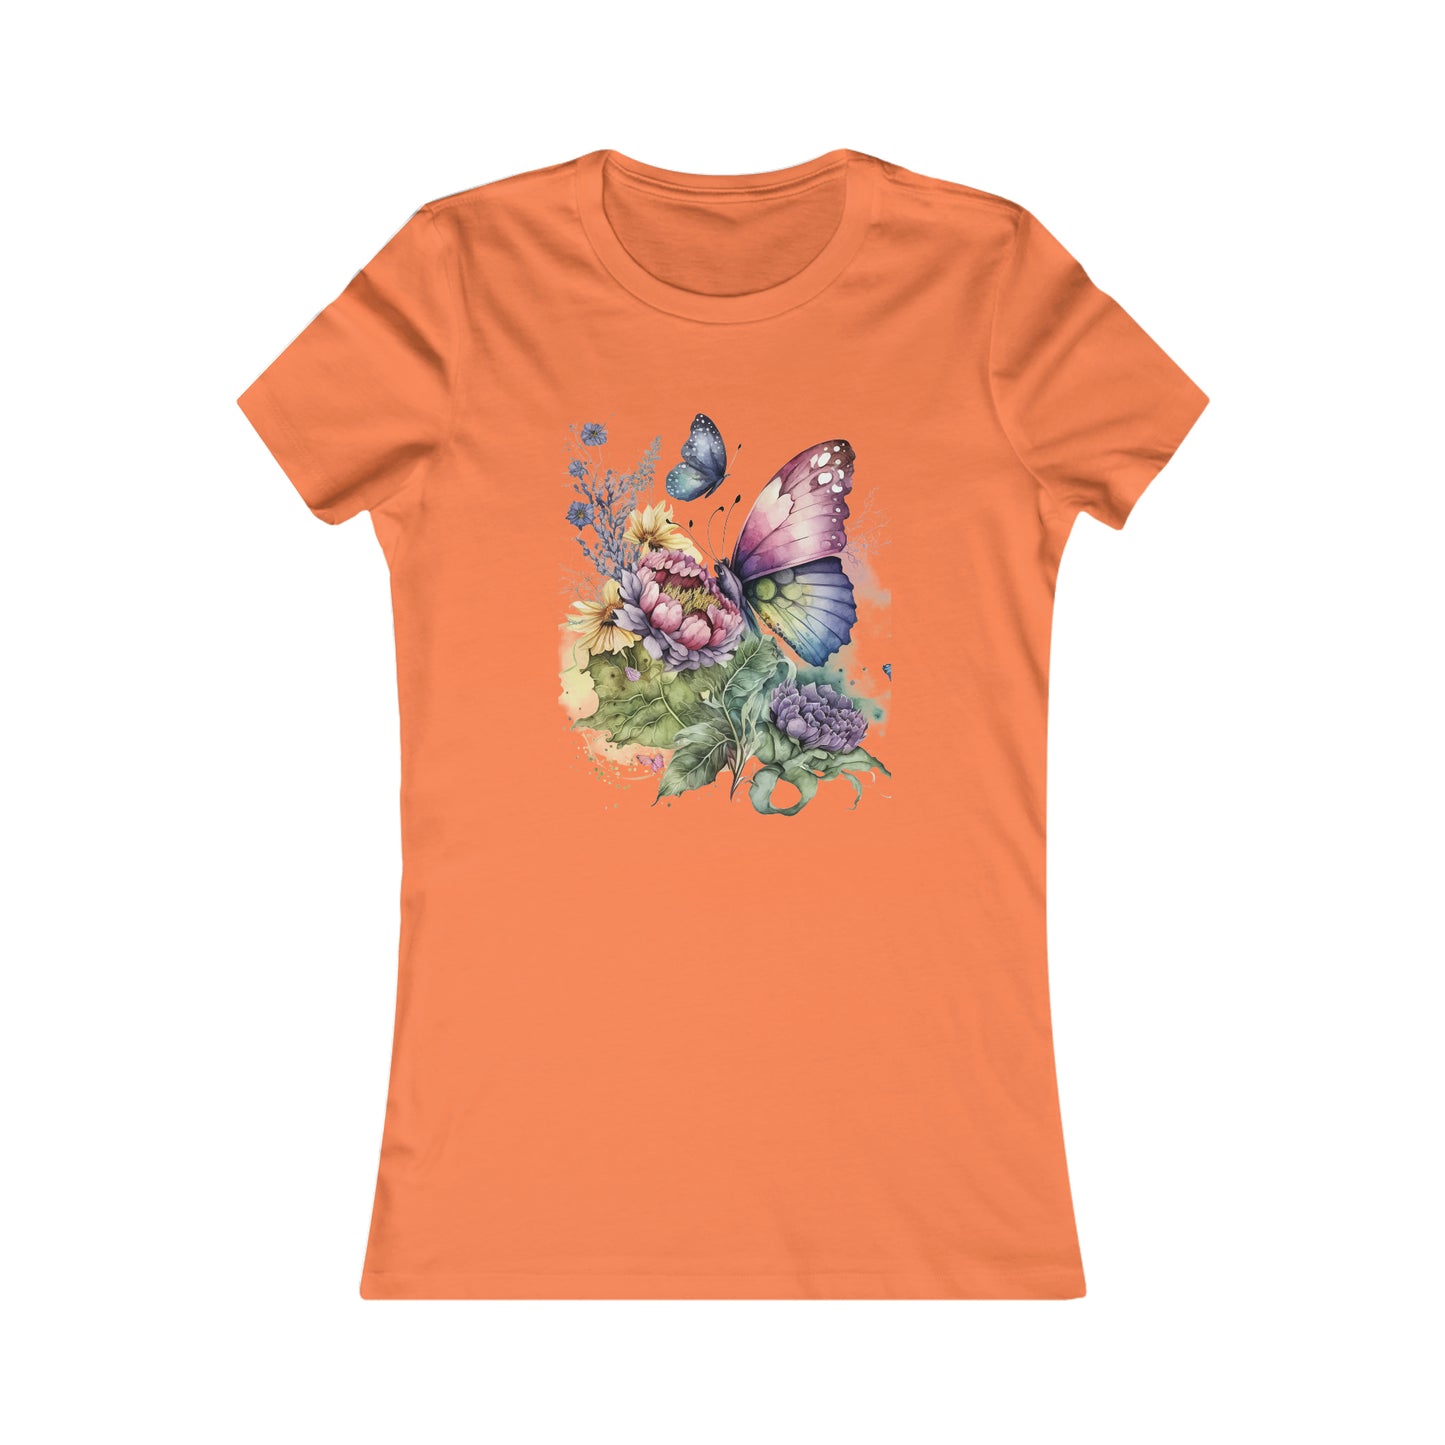 Express Yourself with Our Women's Butterfly Flowers T-Shirt - The Perfect Gift for Fashion-Forward Women and Girls